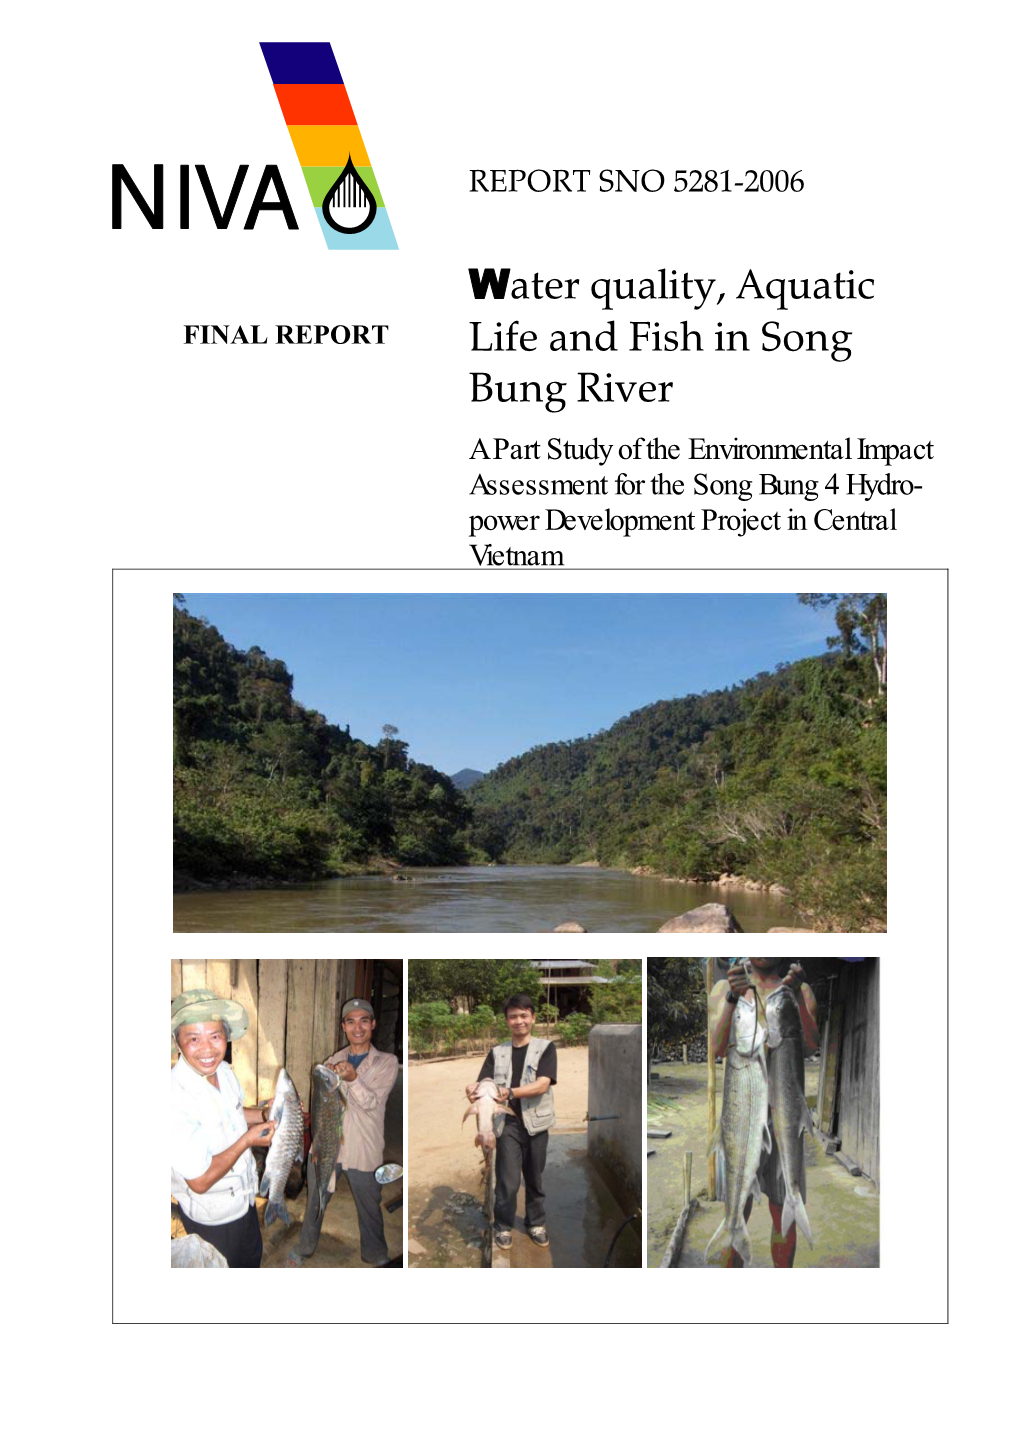 Water Quality, Aquatic Life and Fish in Song Bung River